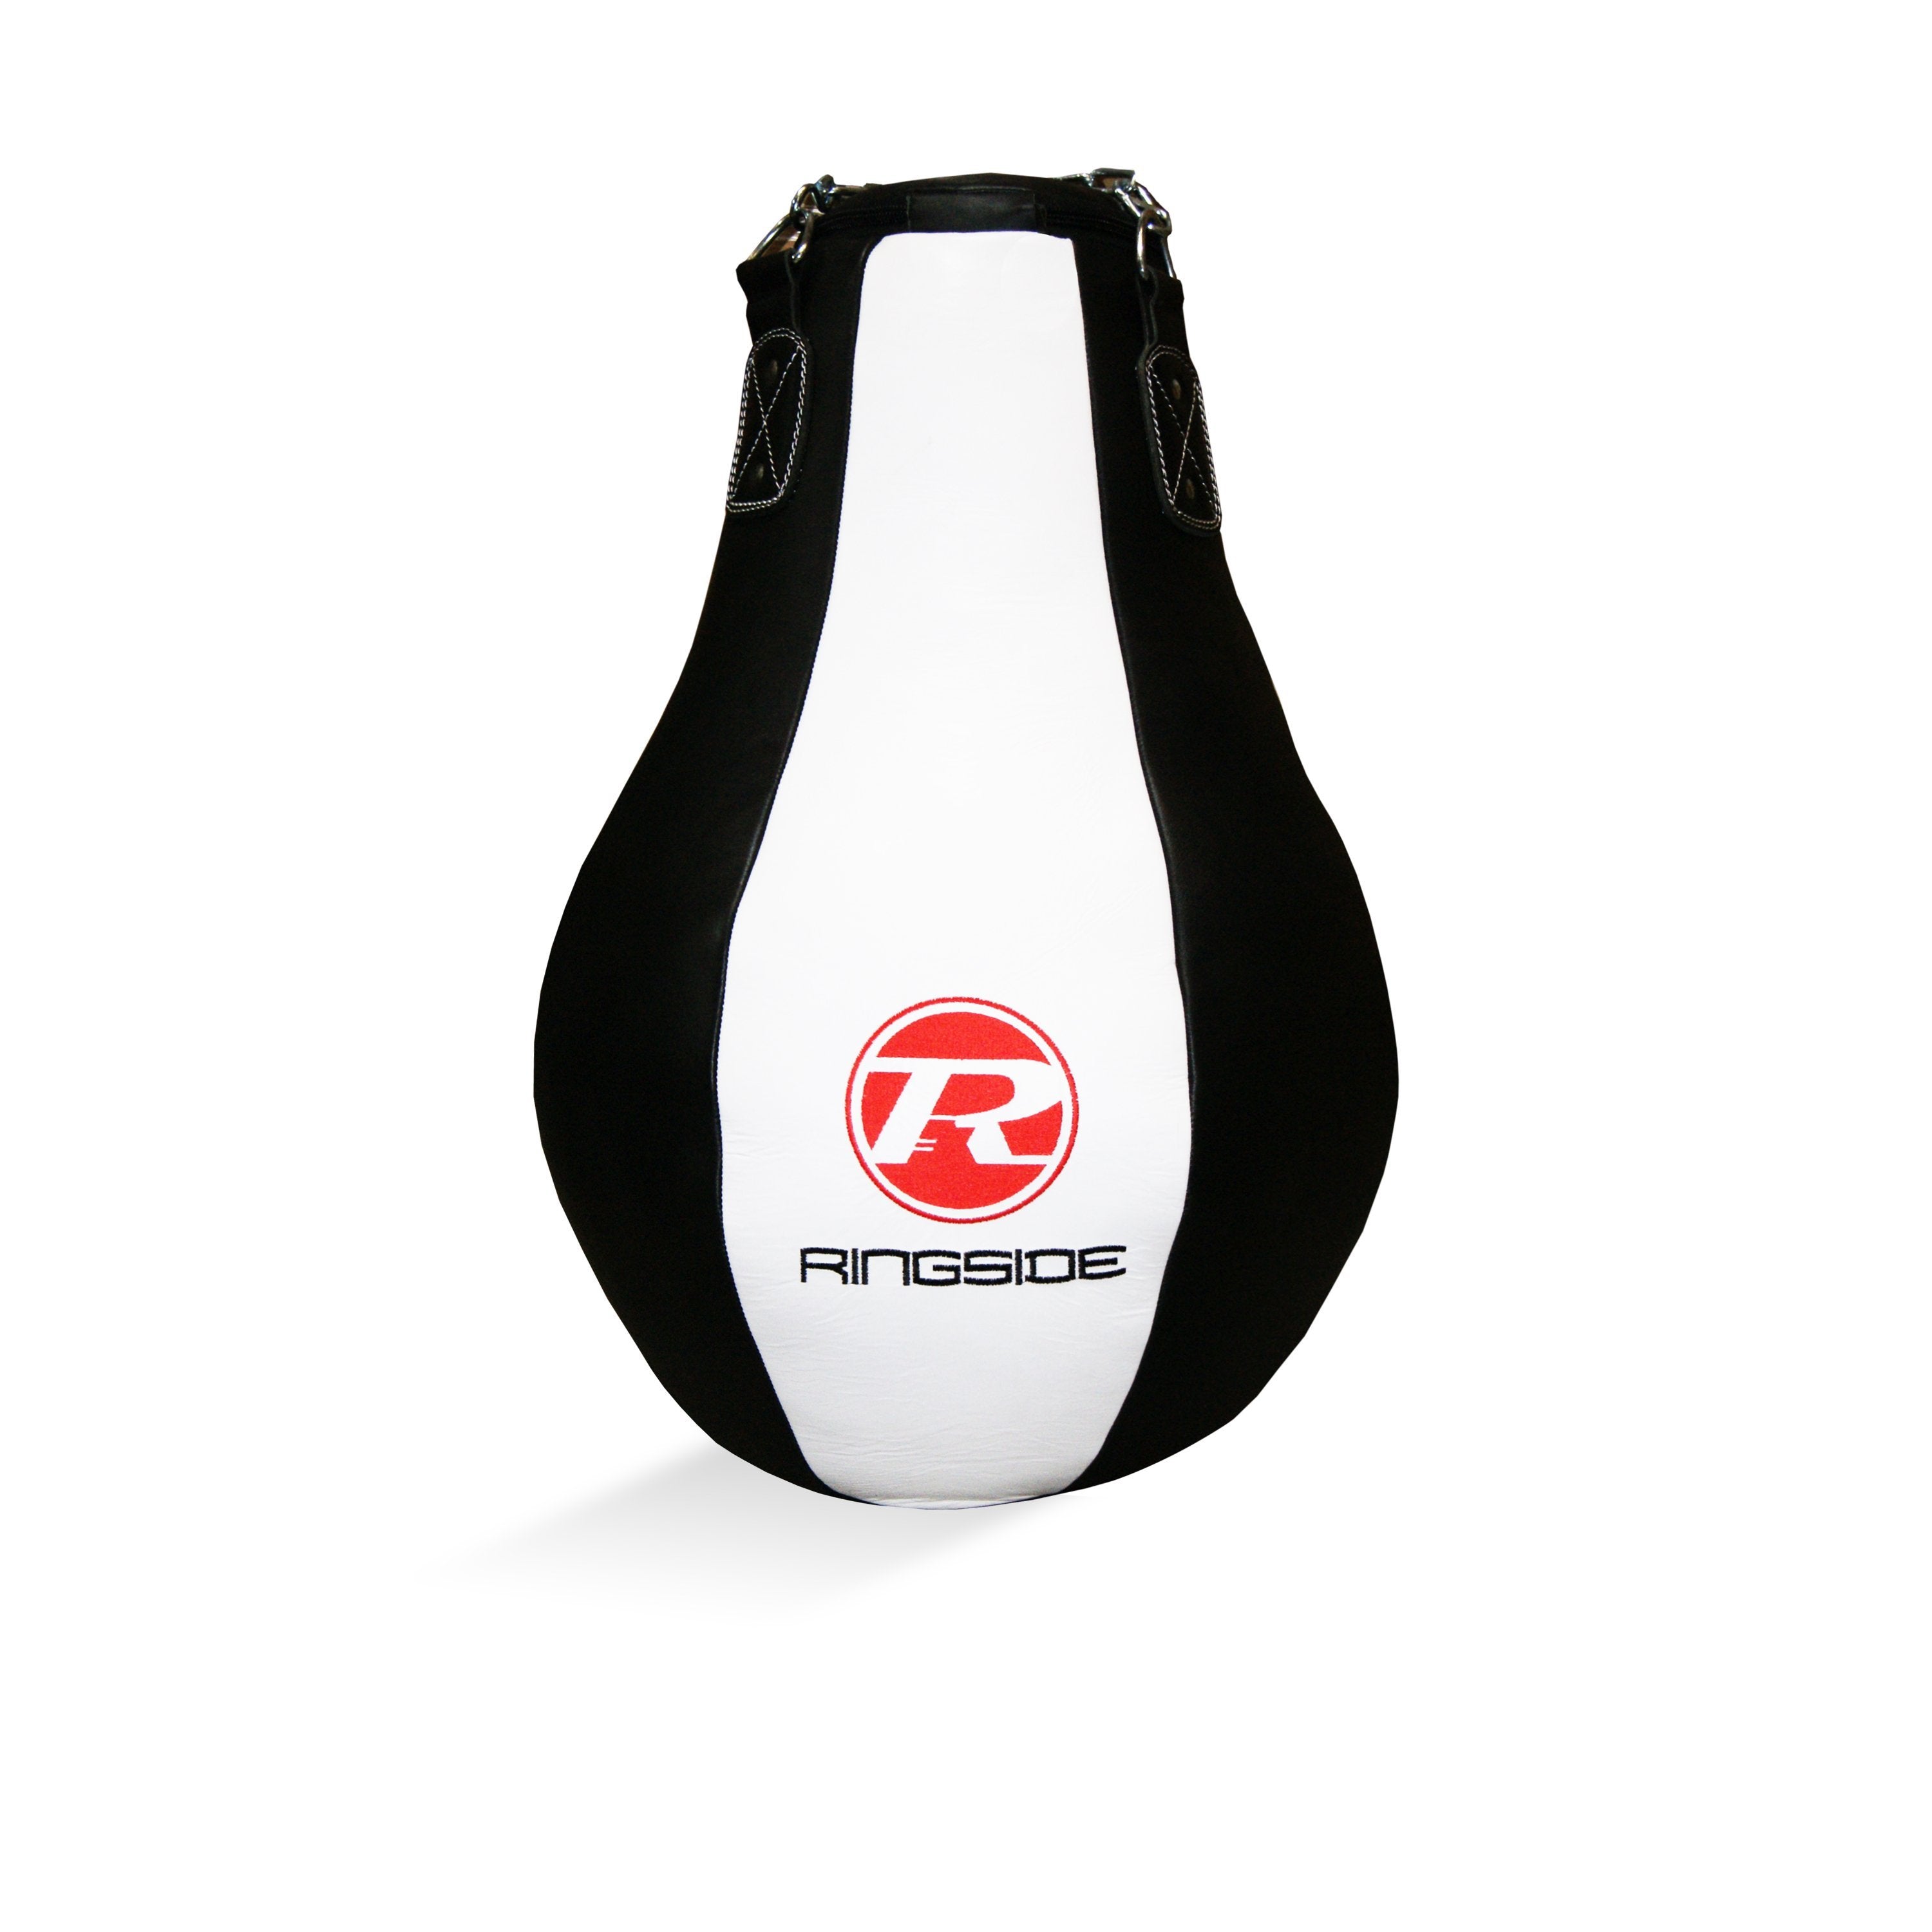 Synthetic Leather Maize Punch Bag - Black/White